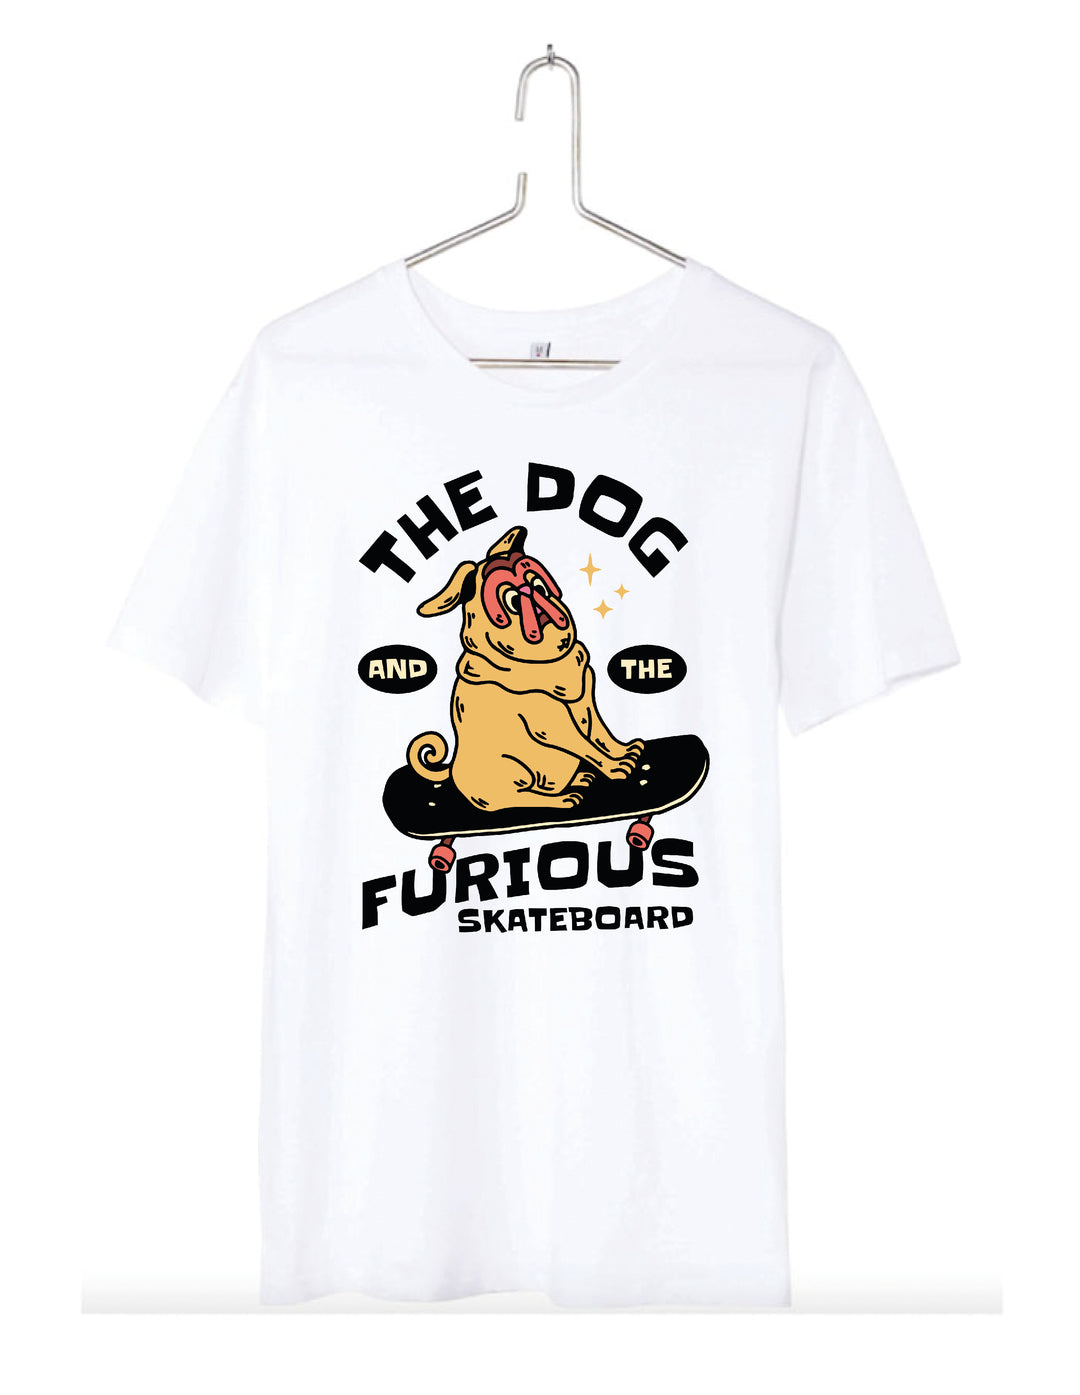 T-Shirt homme The dog and the furious skateboard